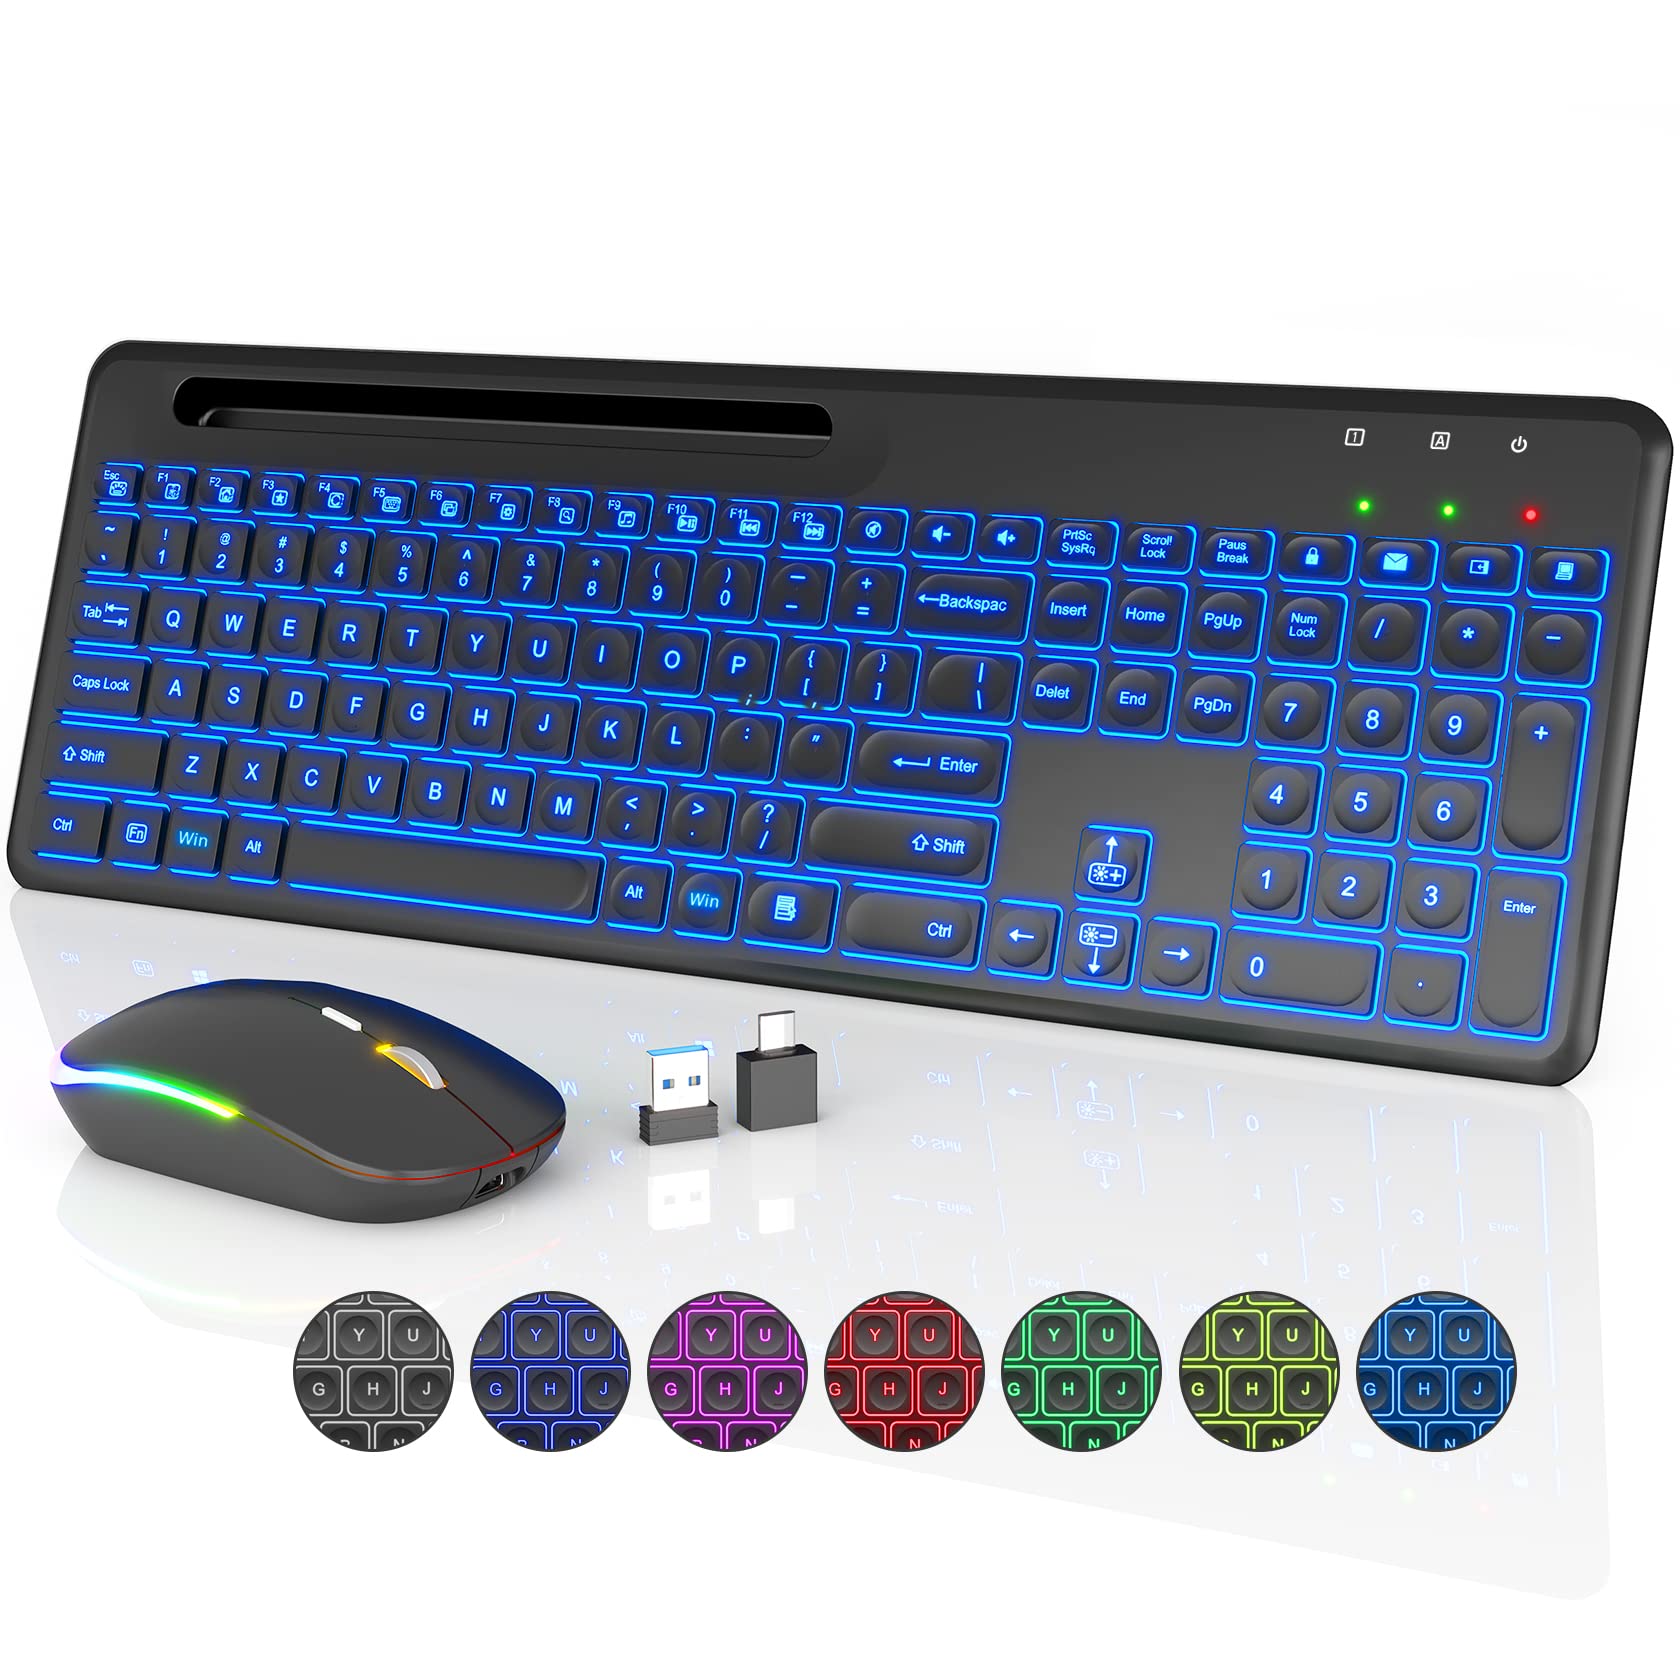 SABLUTE Wireless Keyboard and Mouse Backlit